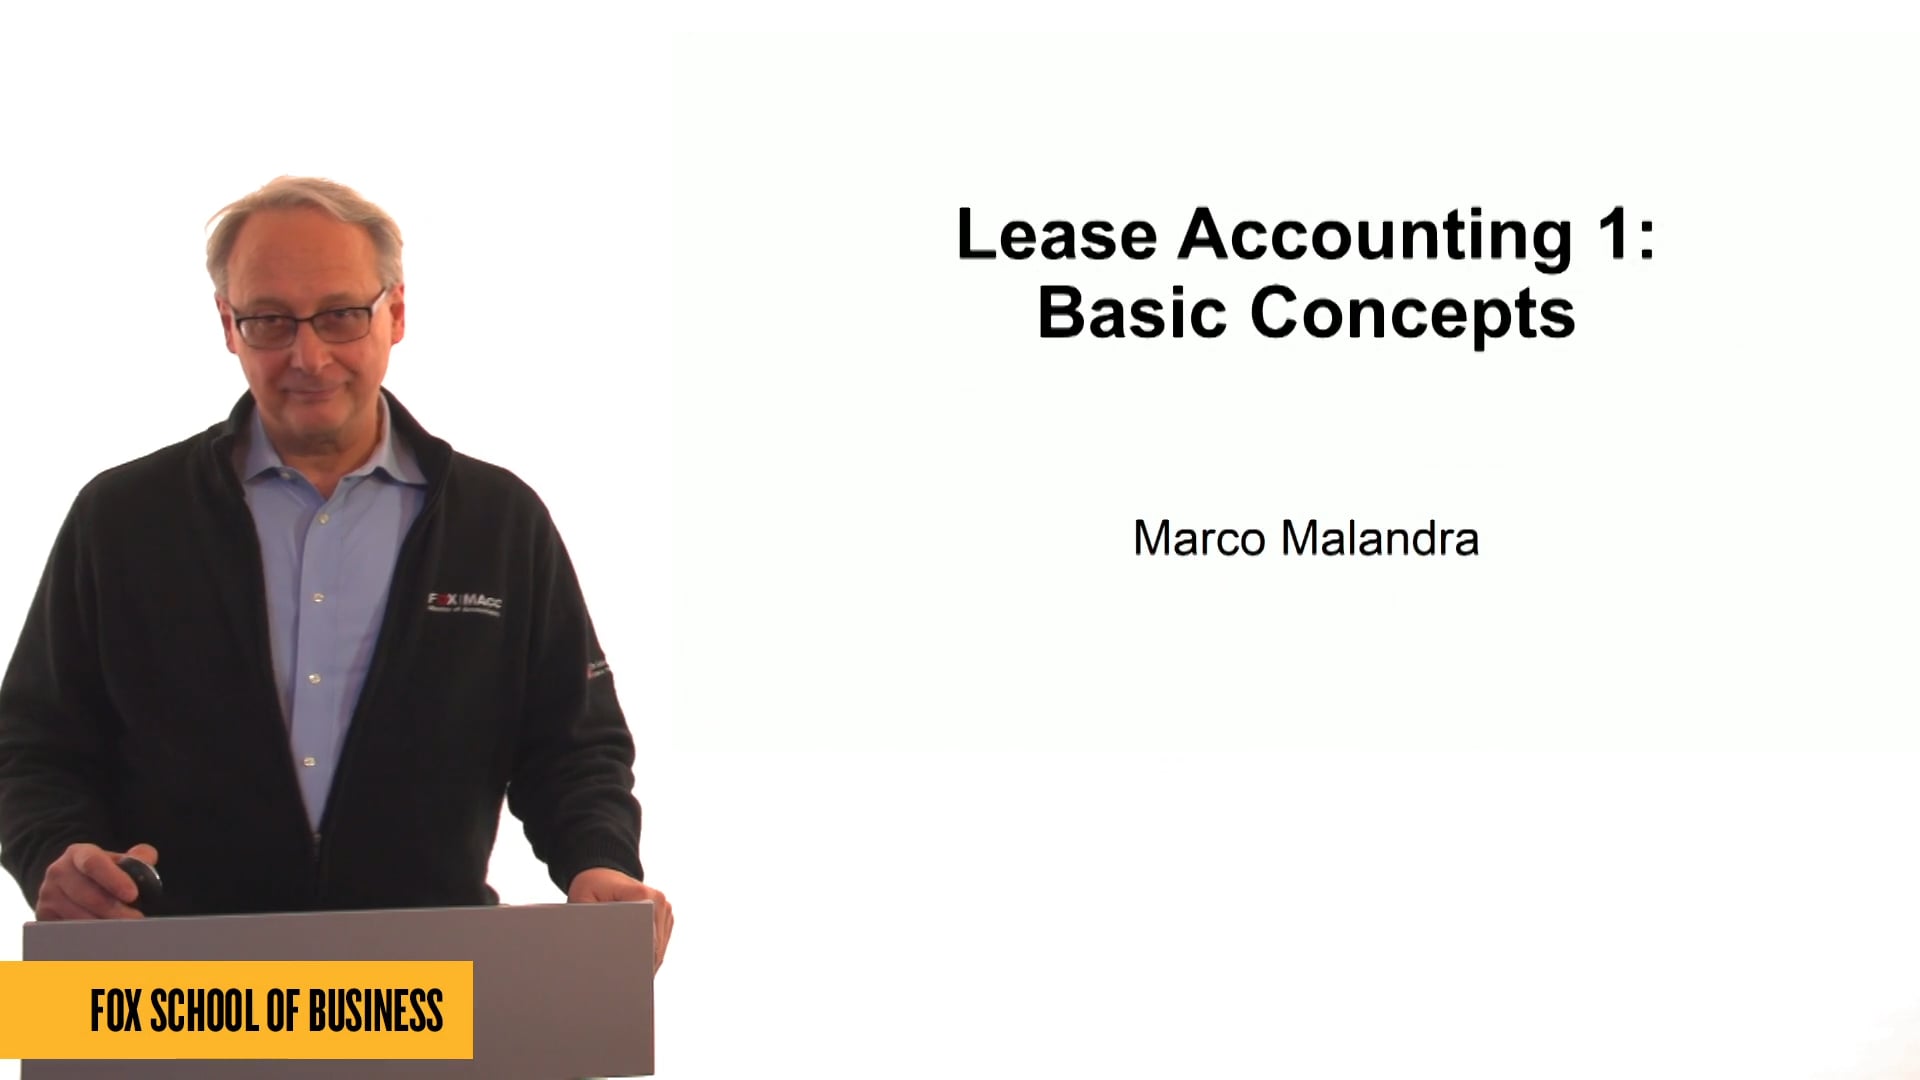 Lease Accounting 1: Basic Concepts